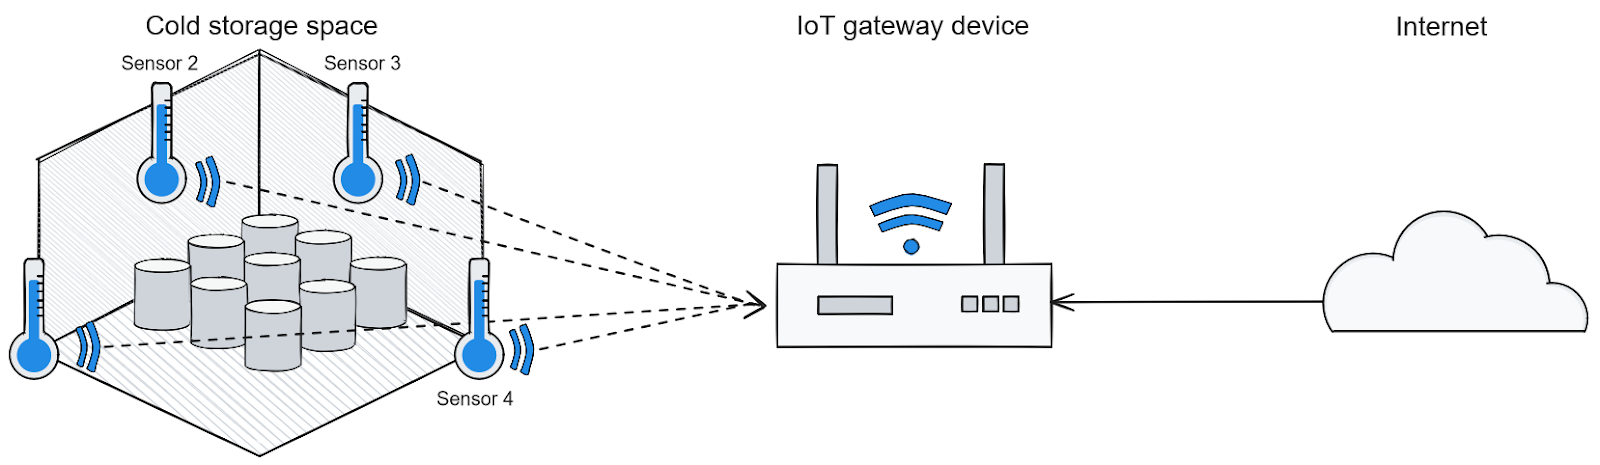 Real-world setup for capturing IoT telemetry data from cold storage